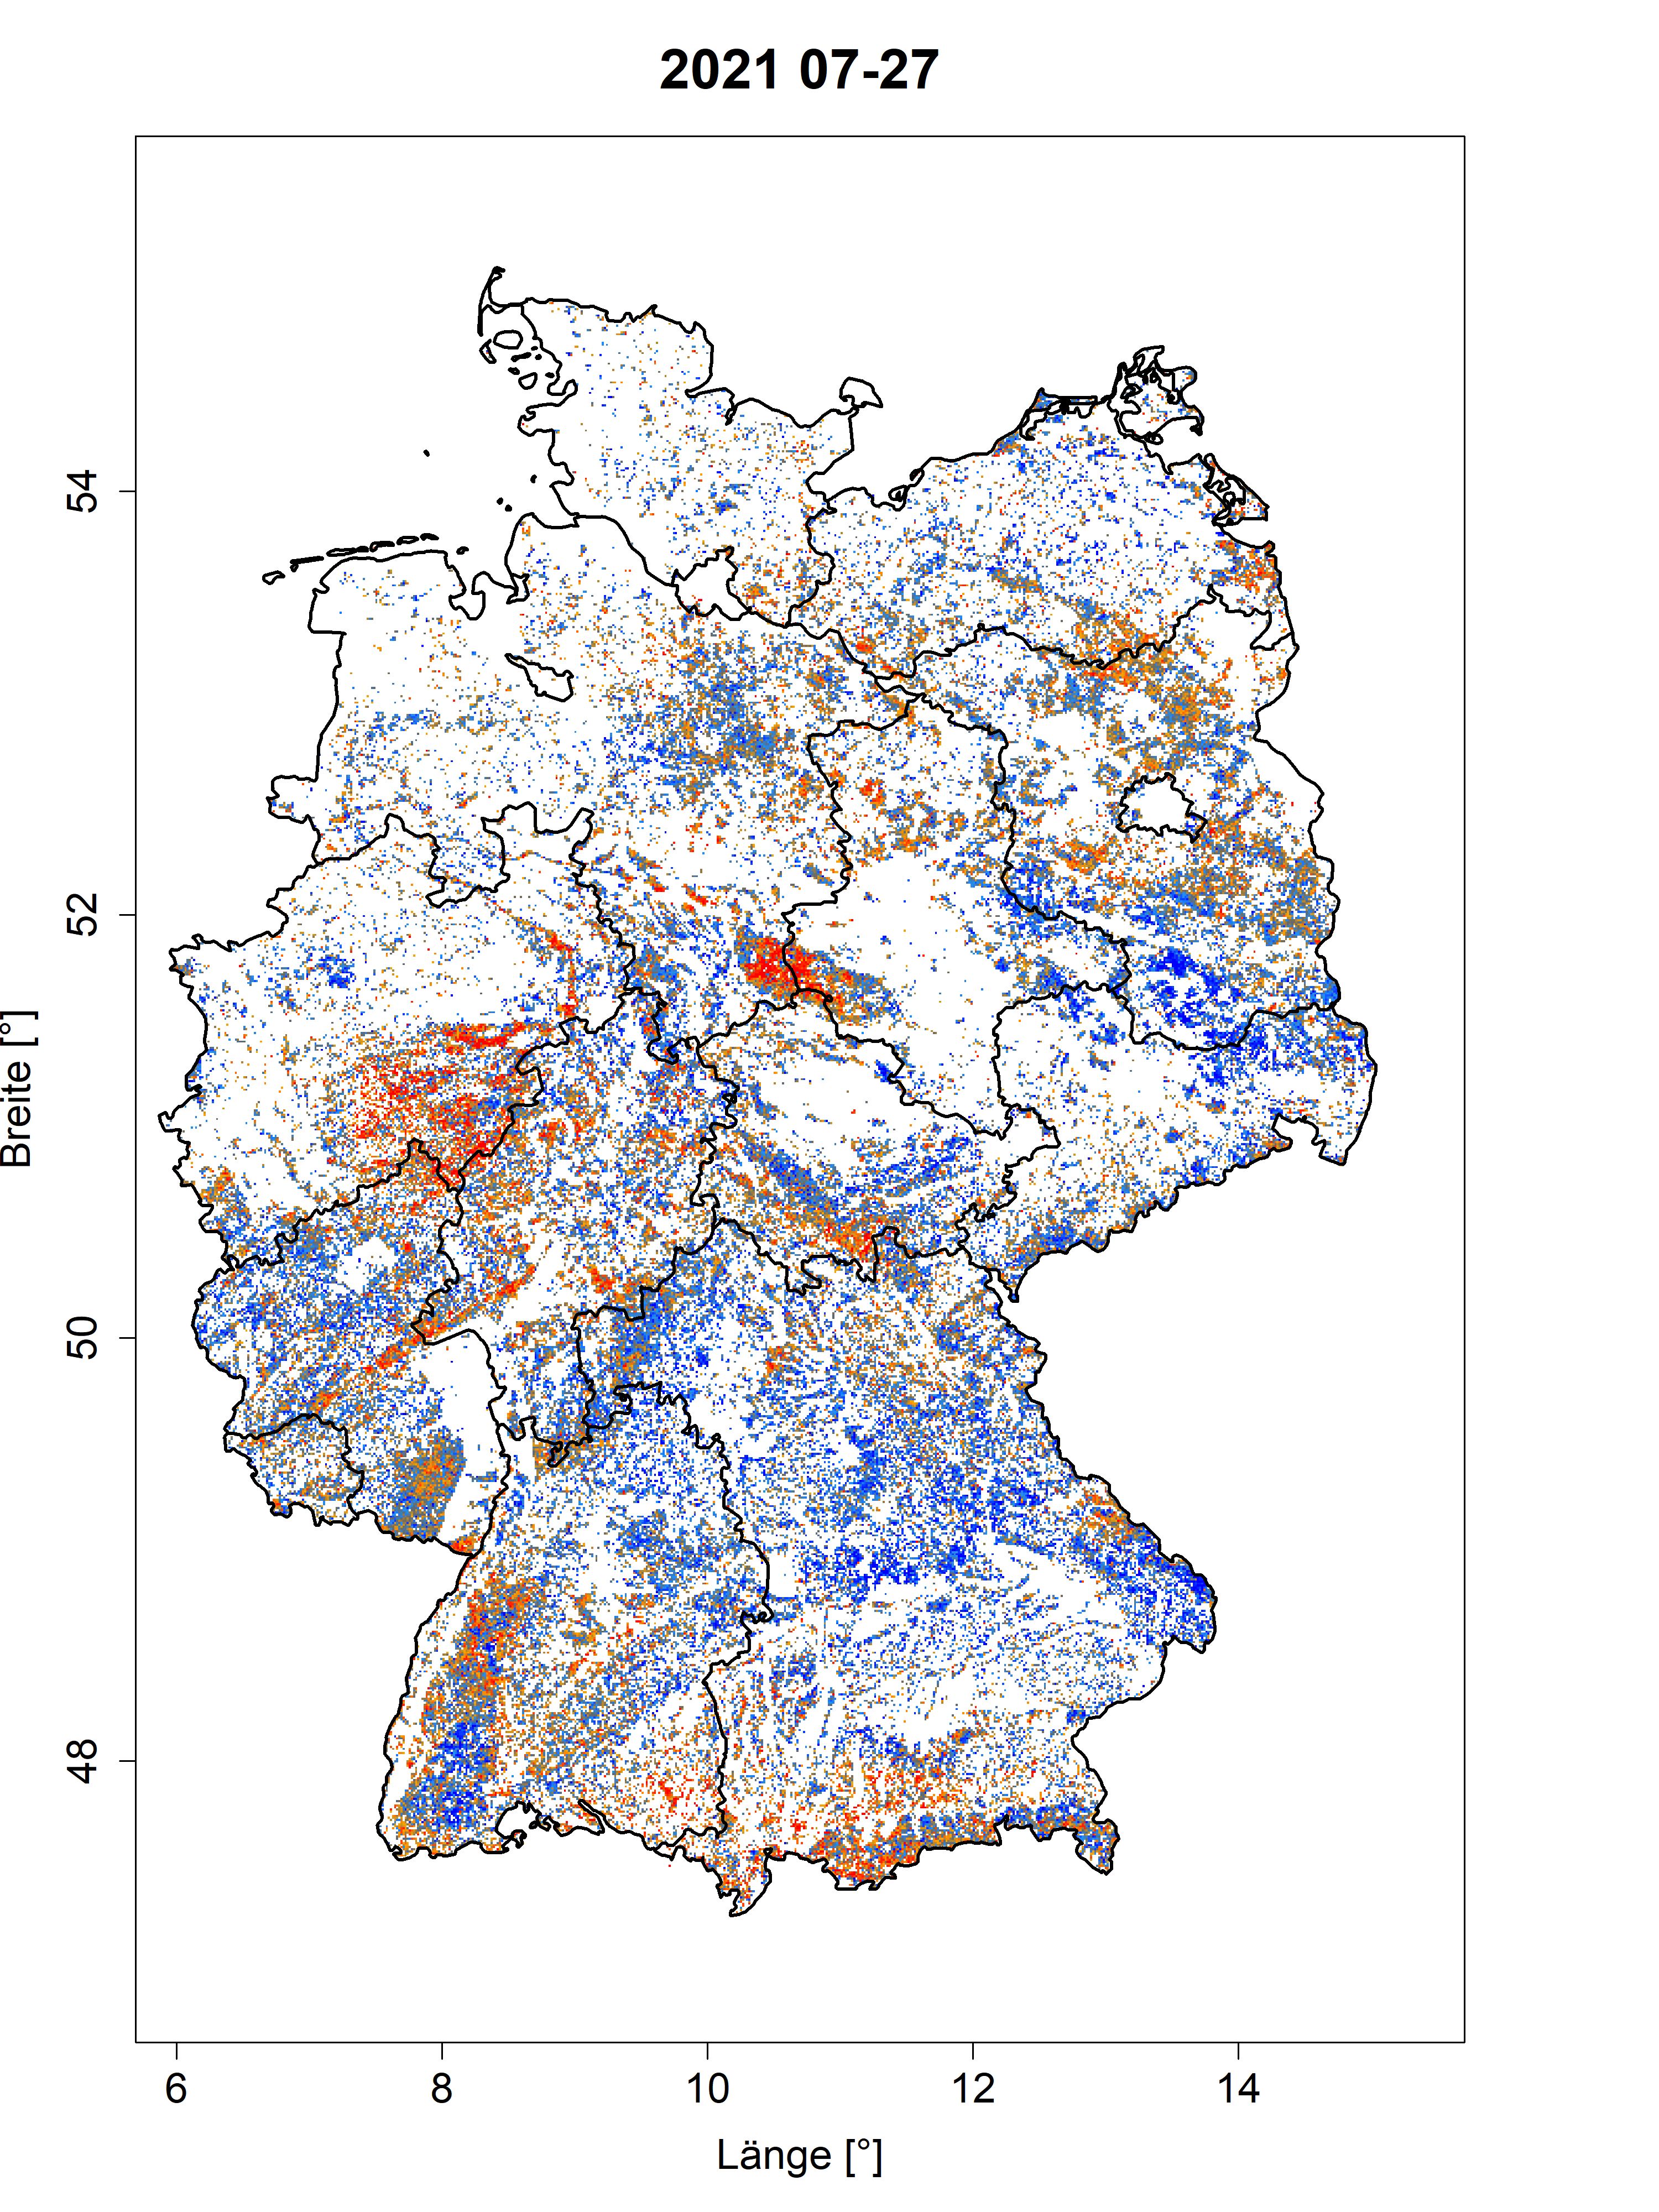 In July 2021, the condition of the forest in Germany was comparatively good - red dots in the FCM indicate low vitality, blue dots indicate high vitality of the trees.